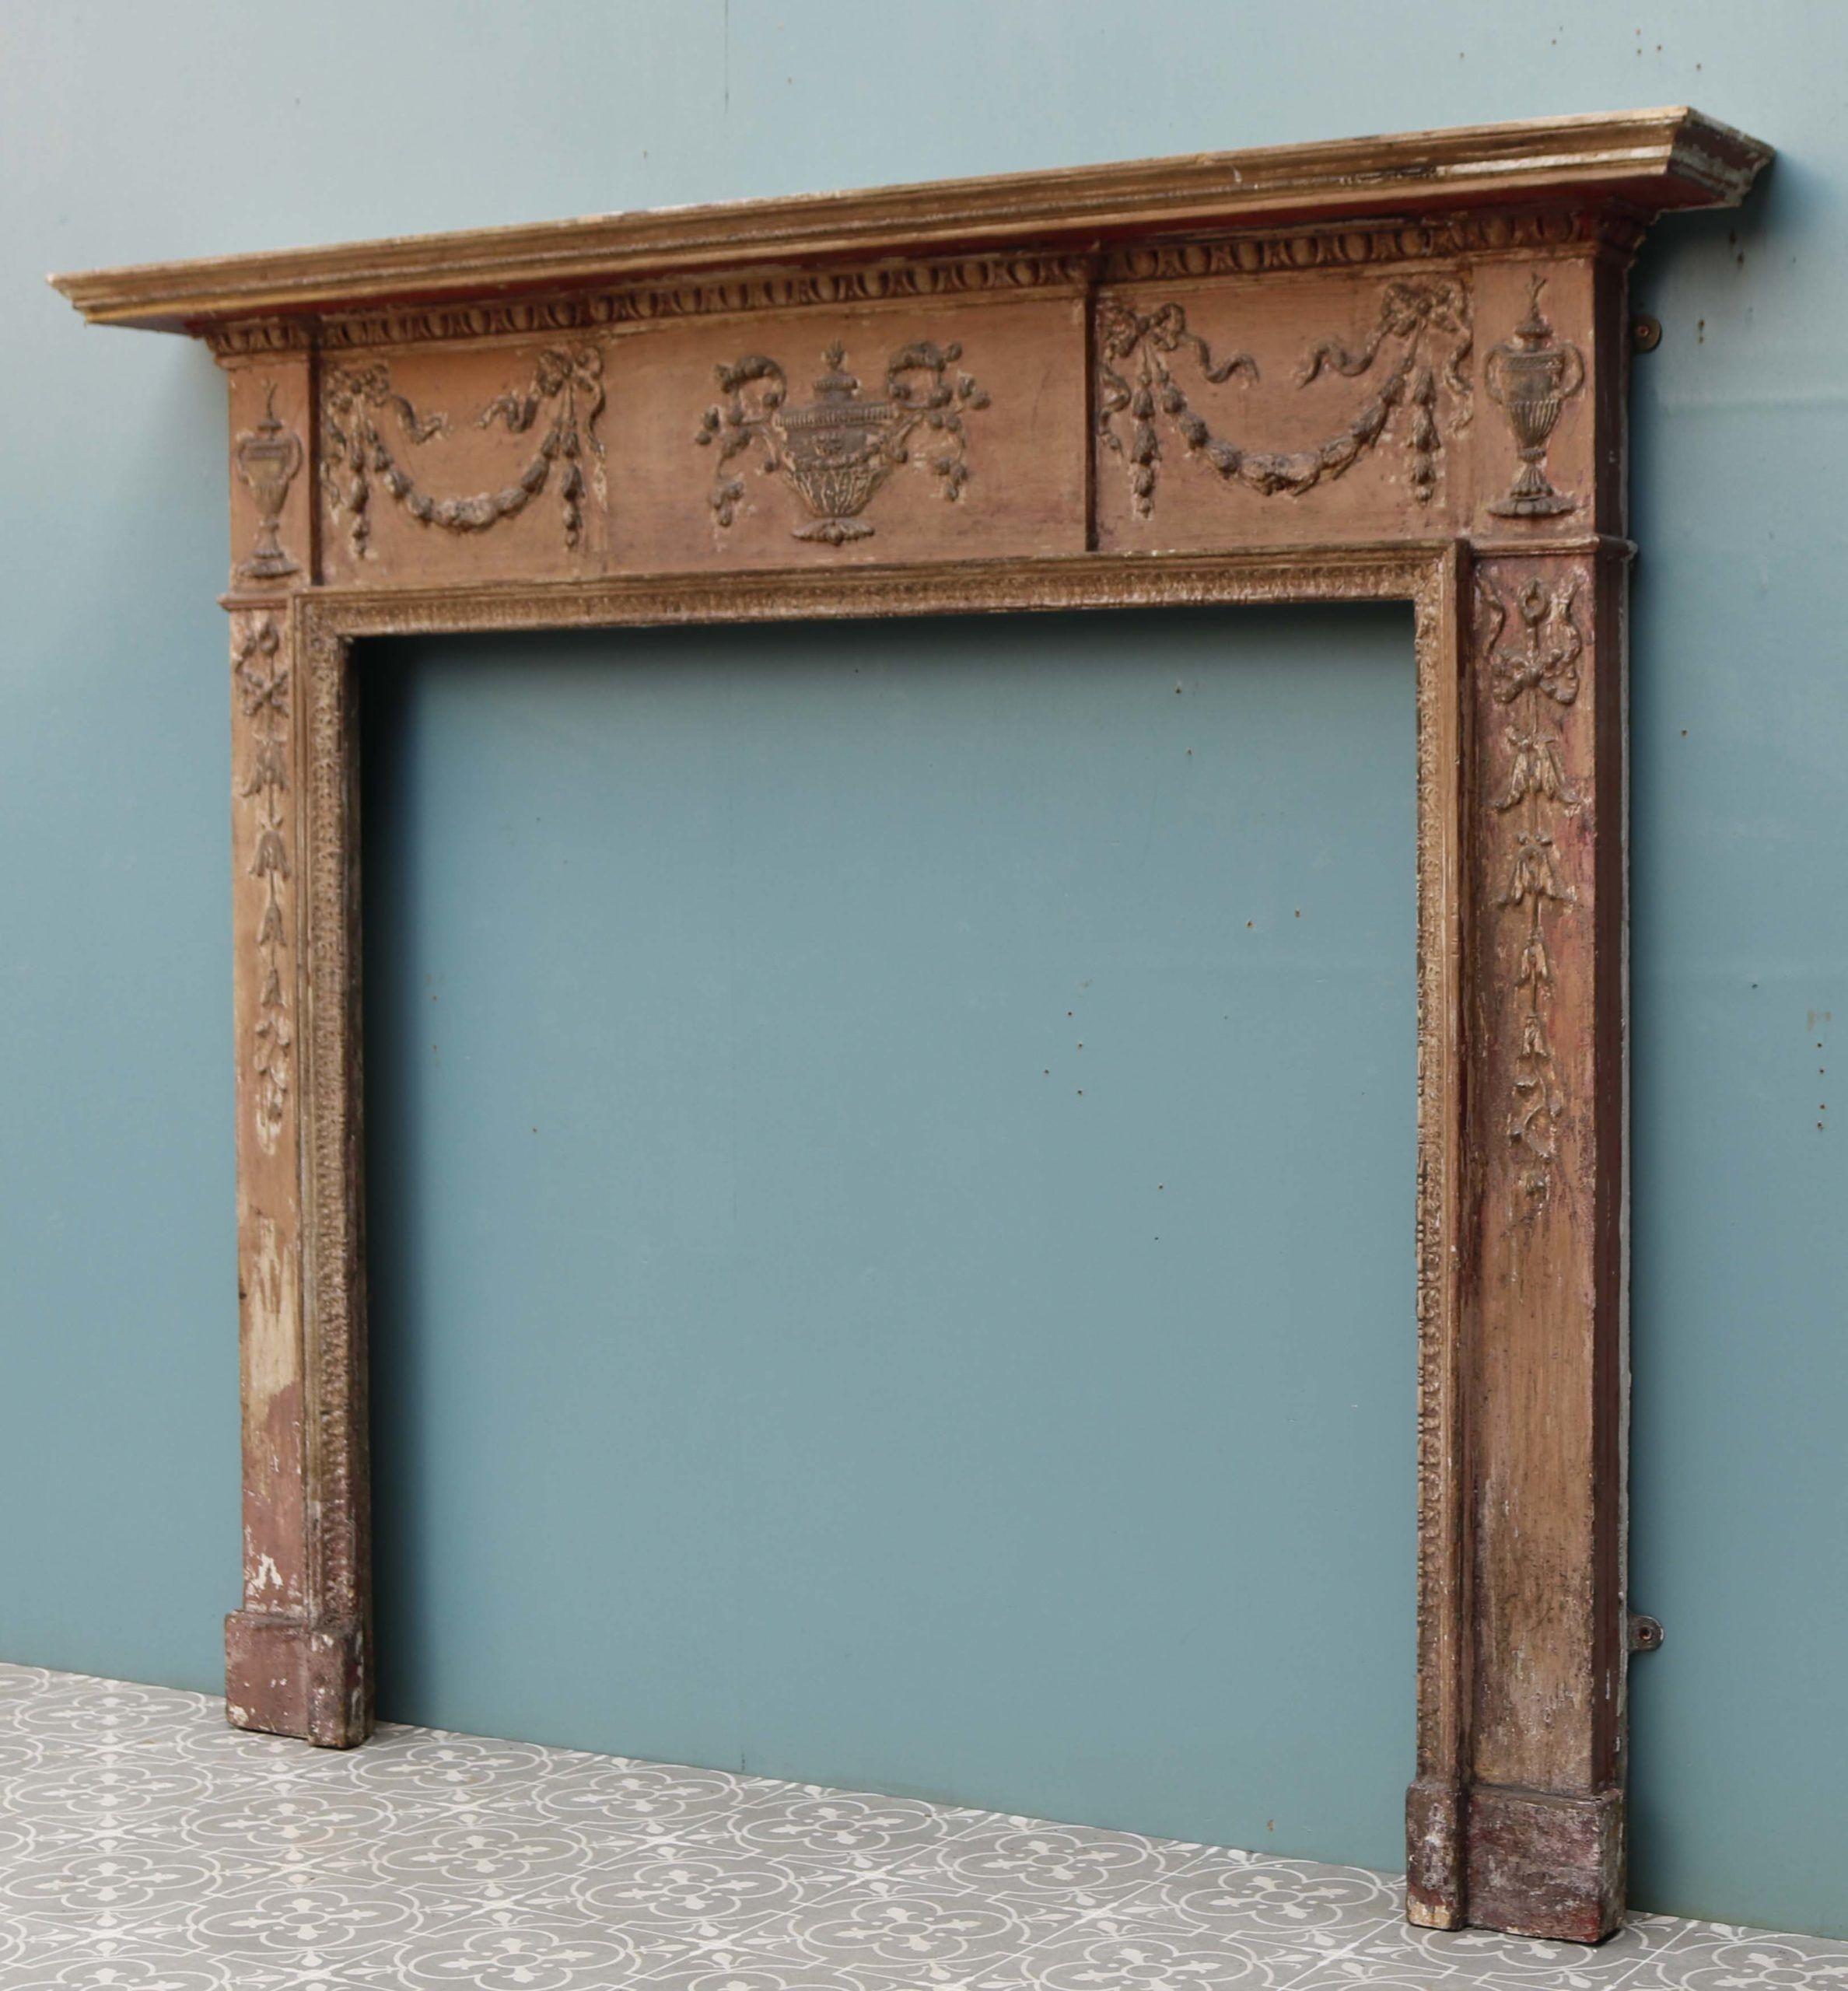 Rustic Neoclassical Style Fire Surround. A mid 19th century Pine and Composition fire surround with a decorative frieze of urn and swag mouldings, in the Adam style.
 
Additional Dimensions
 
Opening height 96.5 cm
 
Opening width 102 cm
 
Across